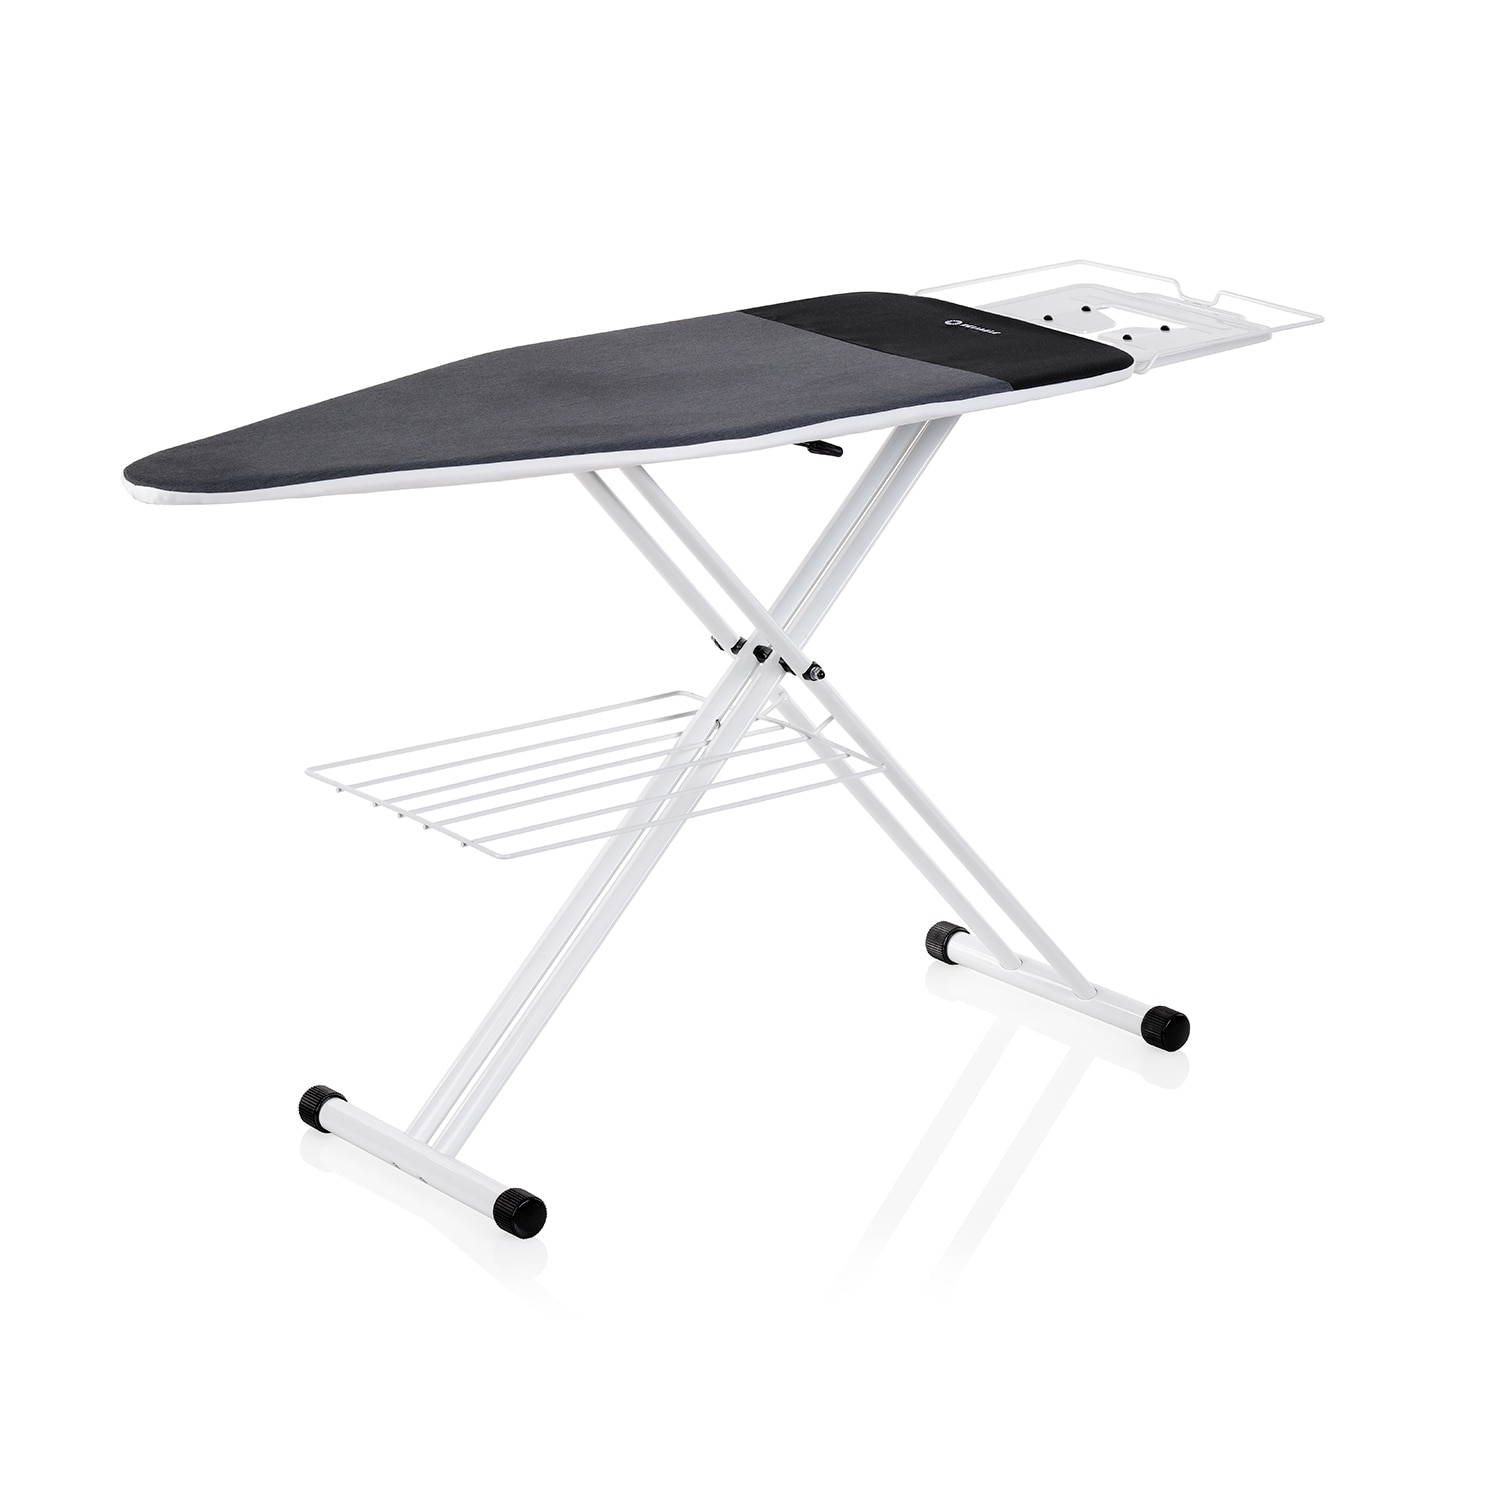 DAZZL Patented 360 Rotation Sided Ironing Board With Iron Rest /Premium EZ71 